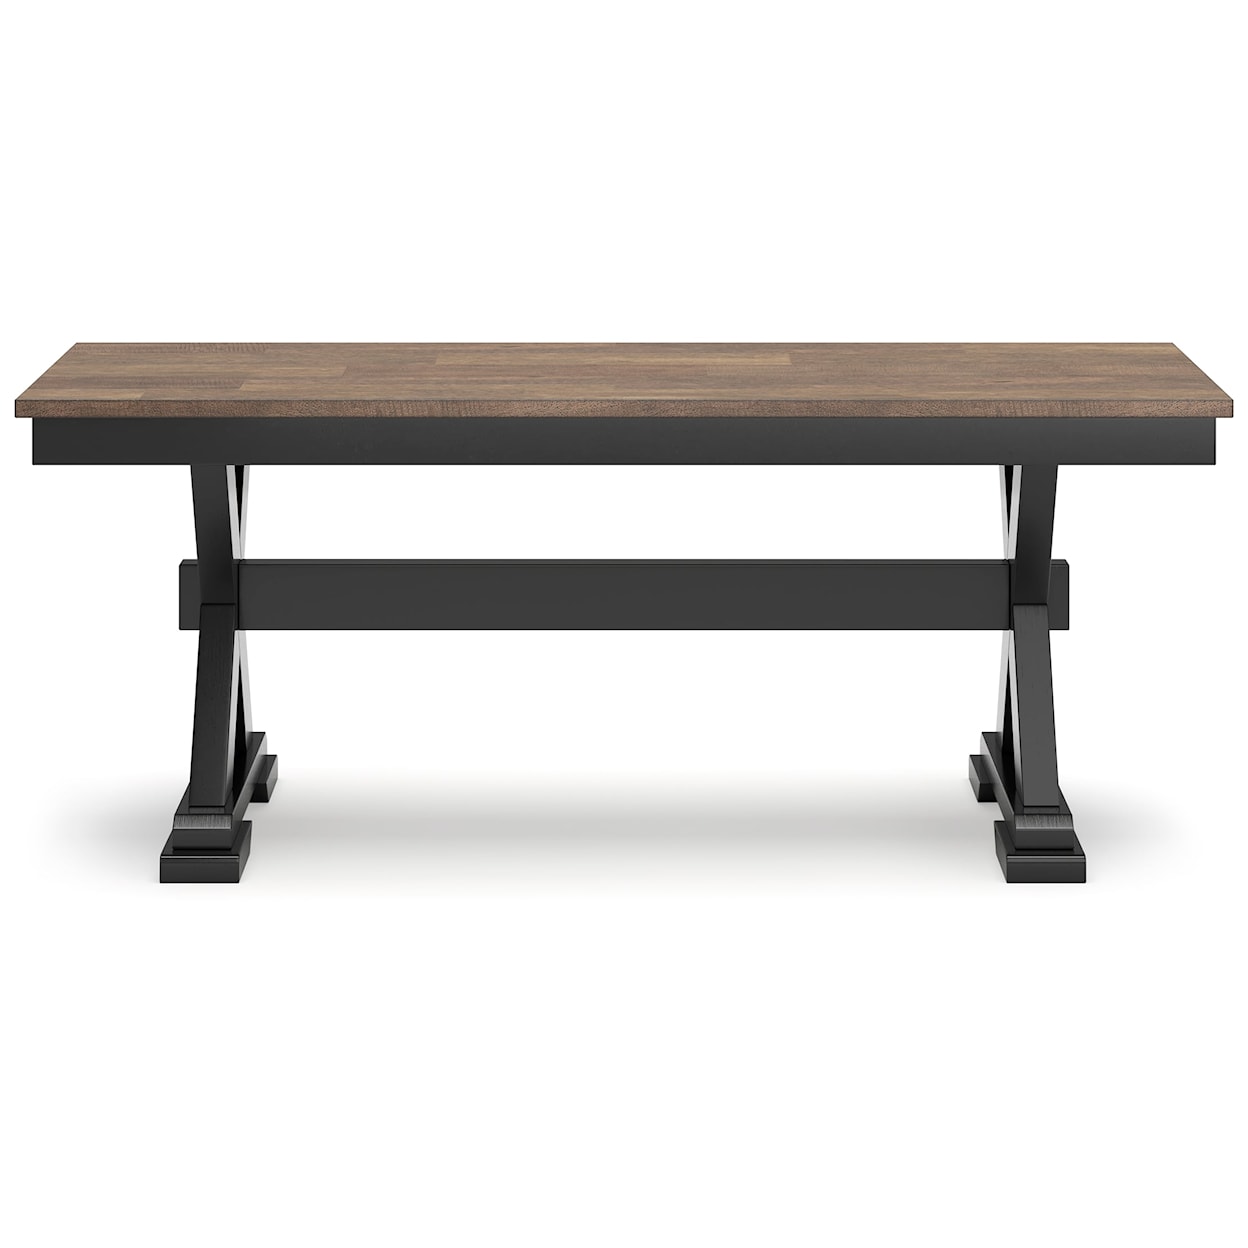 Signature Wildenauer Large Dining Room Bench